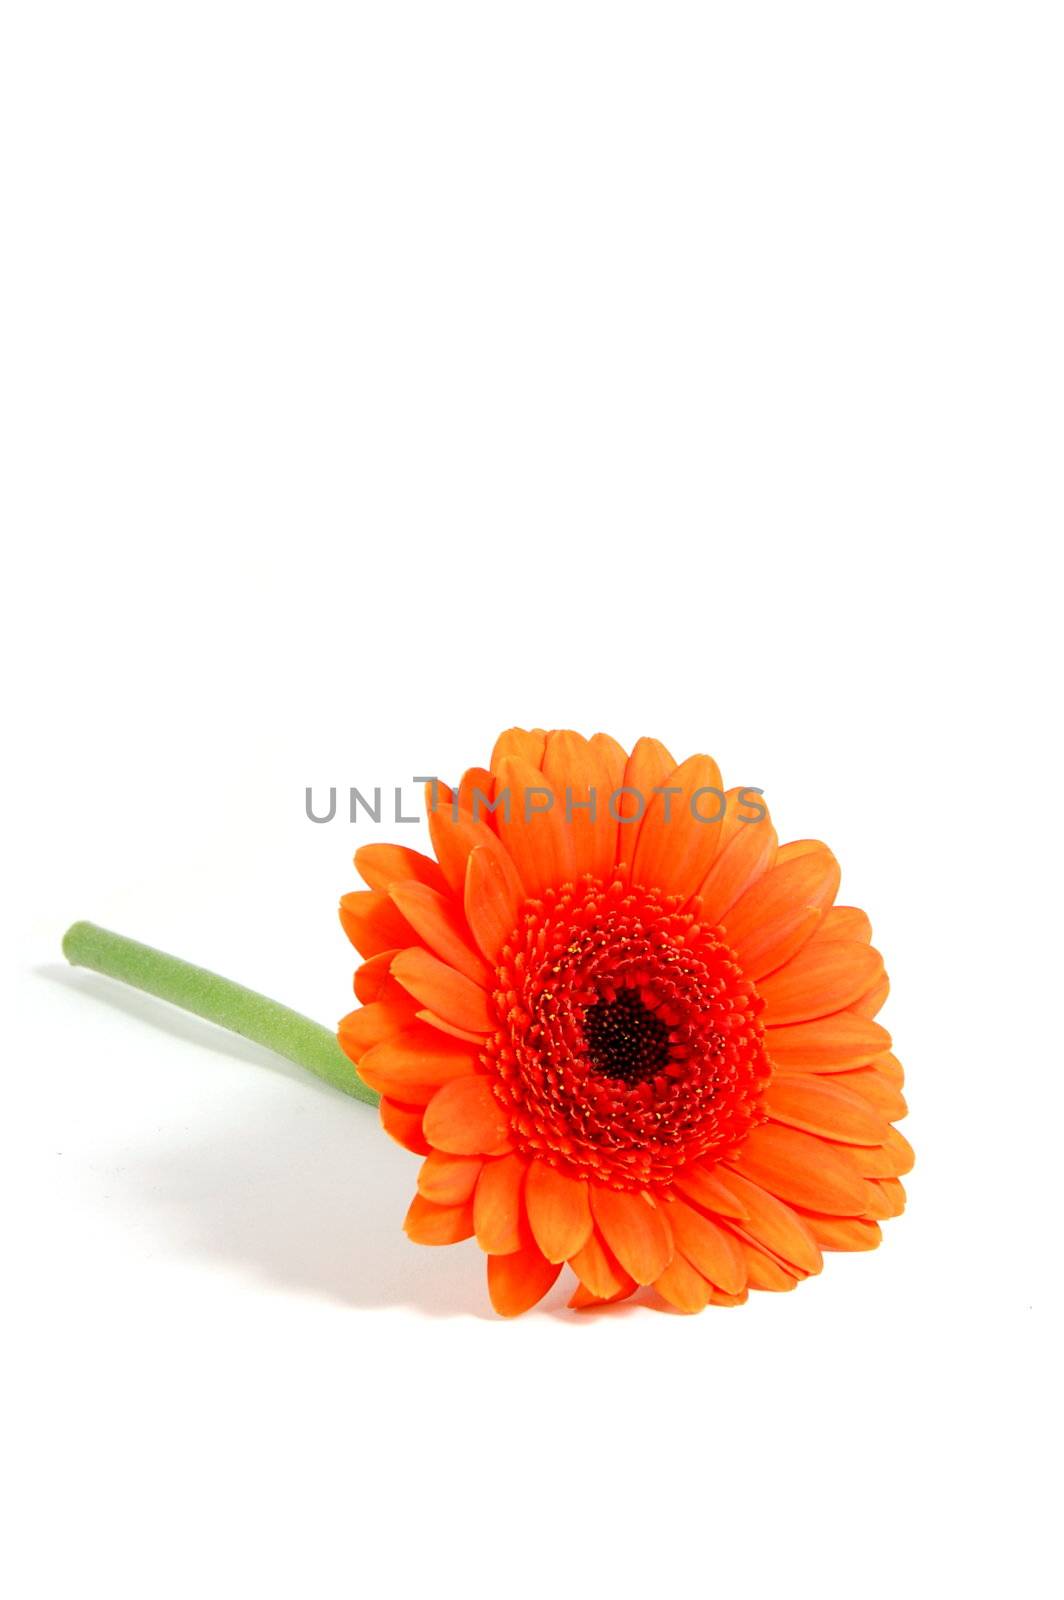 gerbera daisy flower isolated on white background